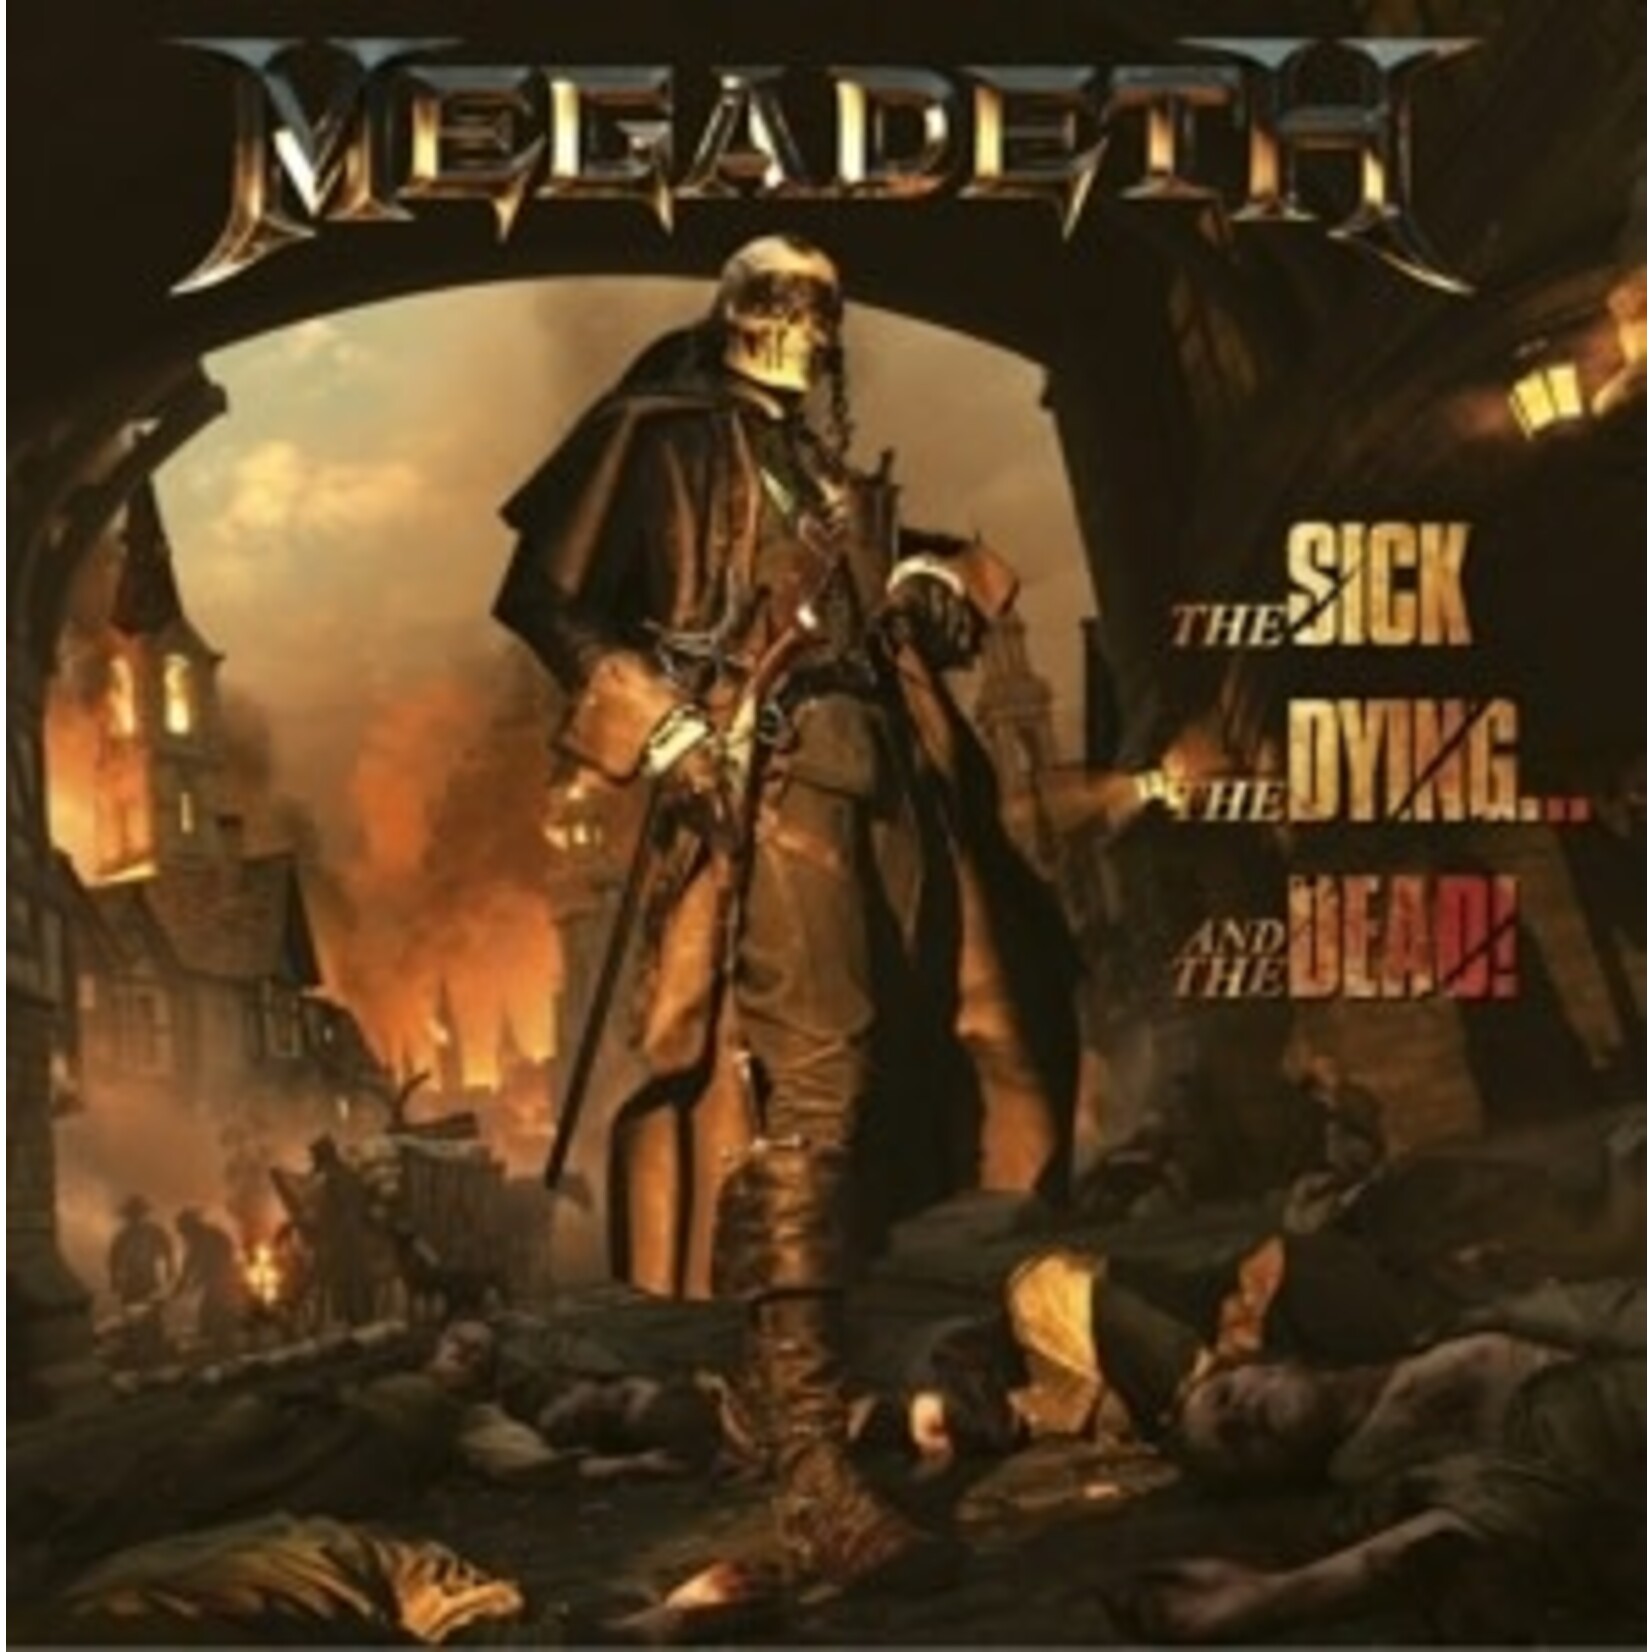 MEGADETH - SICK   THE DYING... AND..THE DEAD!  2LP